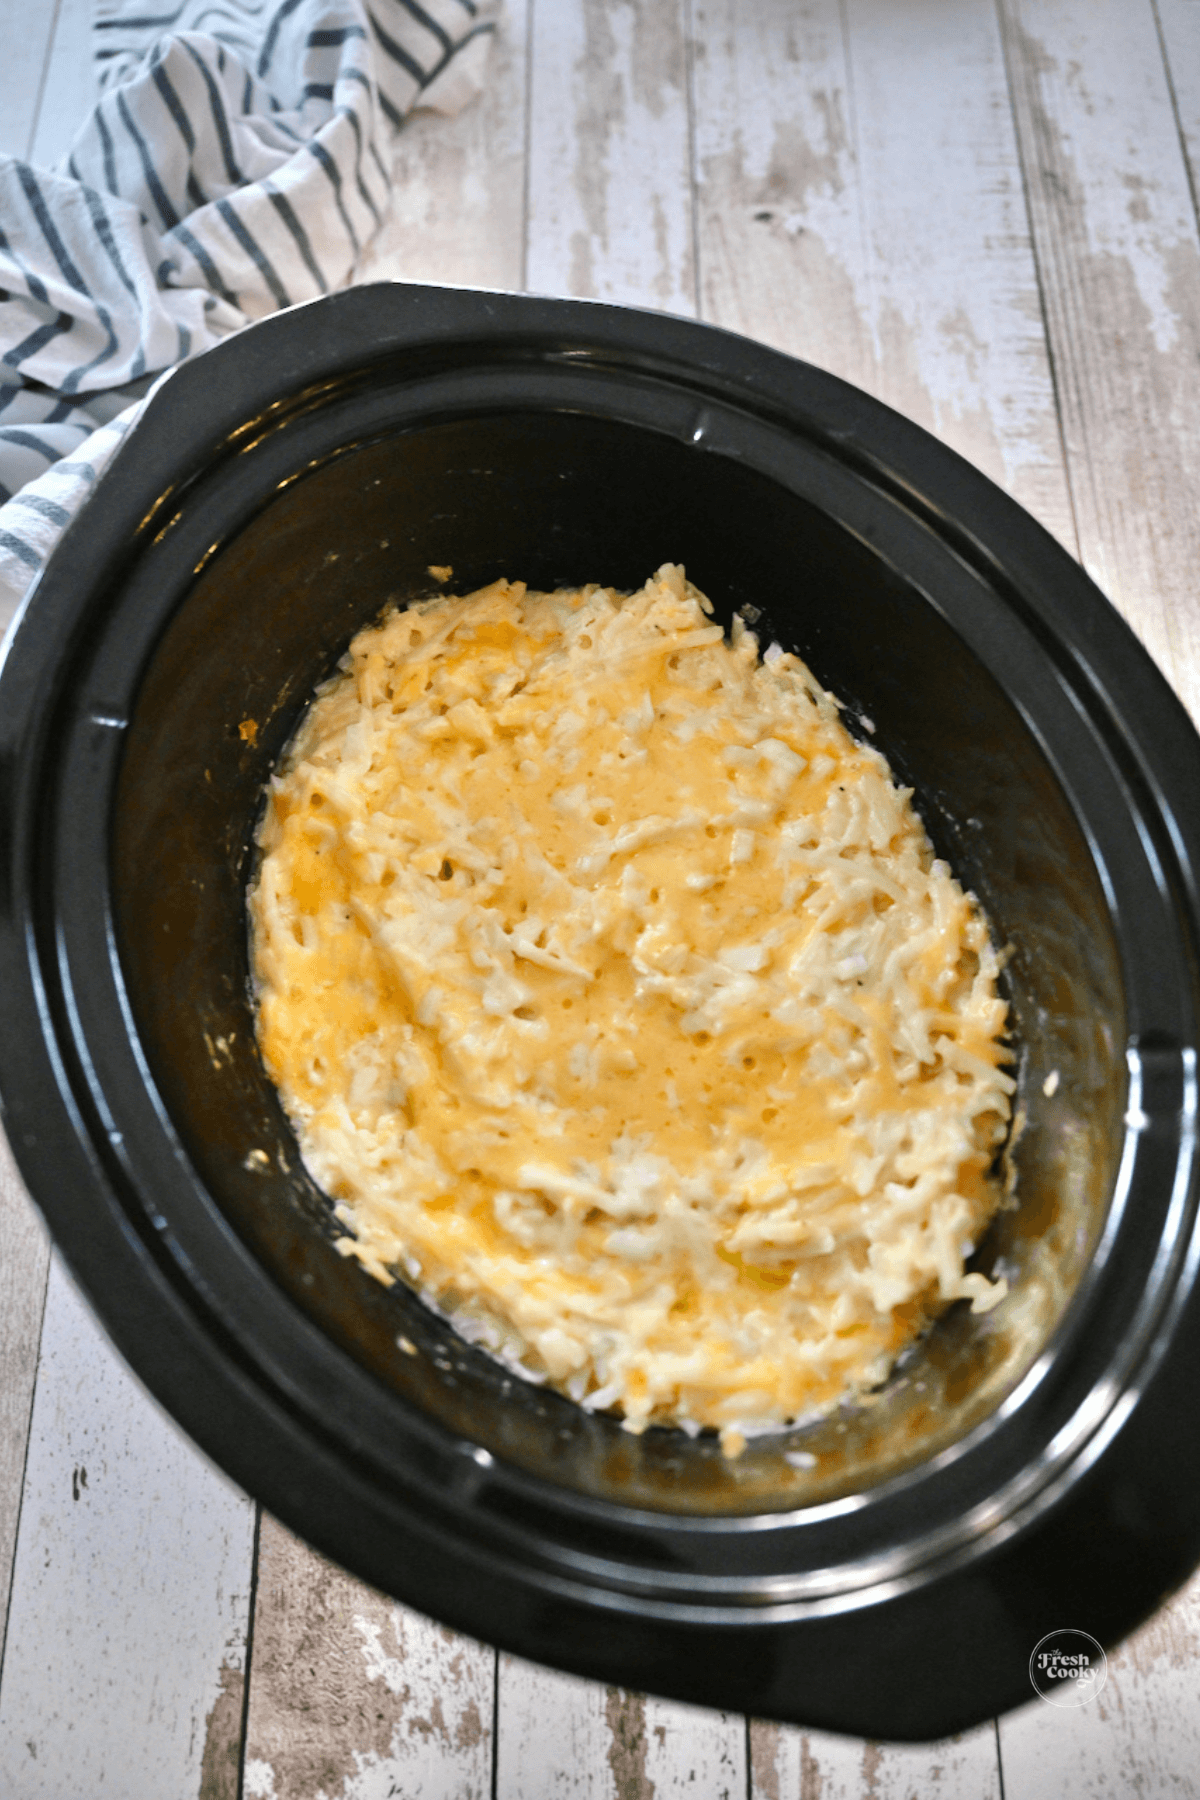 Cooked, cheesy cracker barrel hashbrown casserole in crockpot ready to serve.